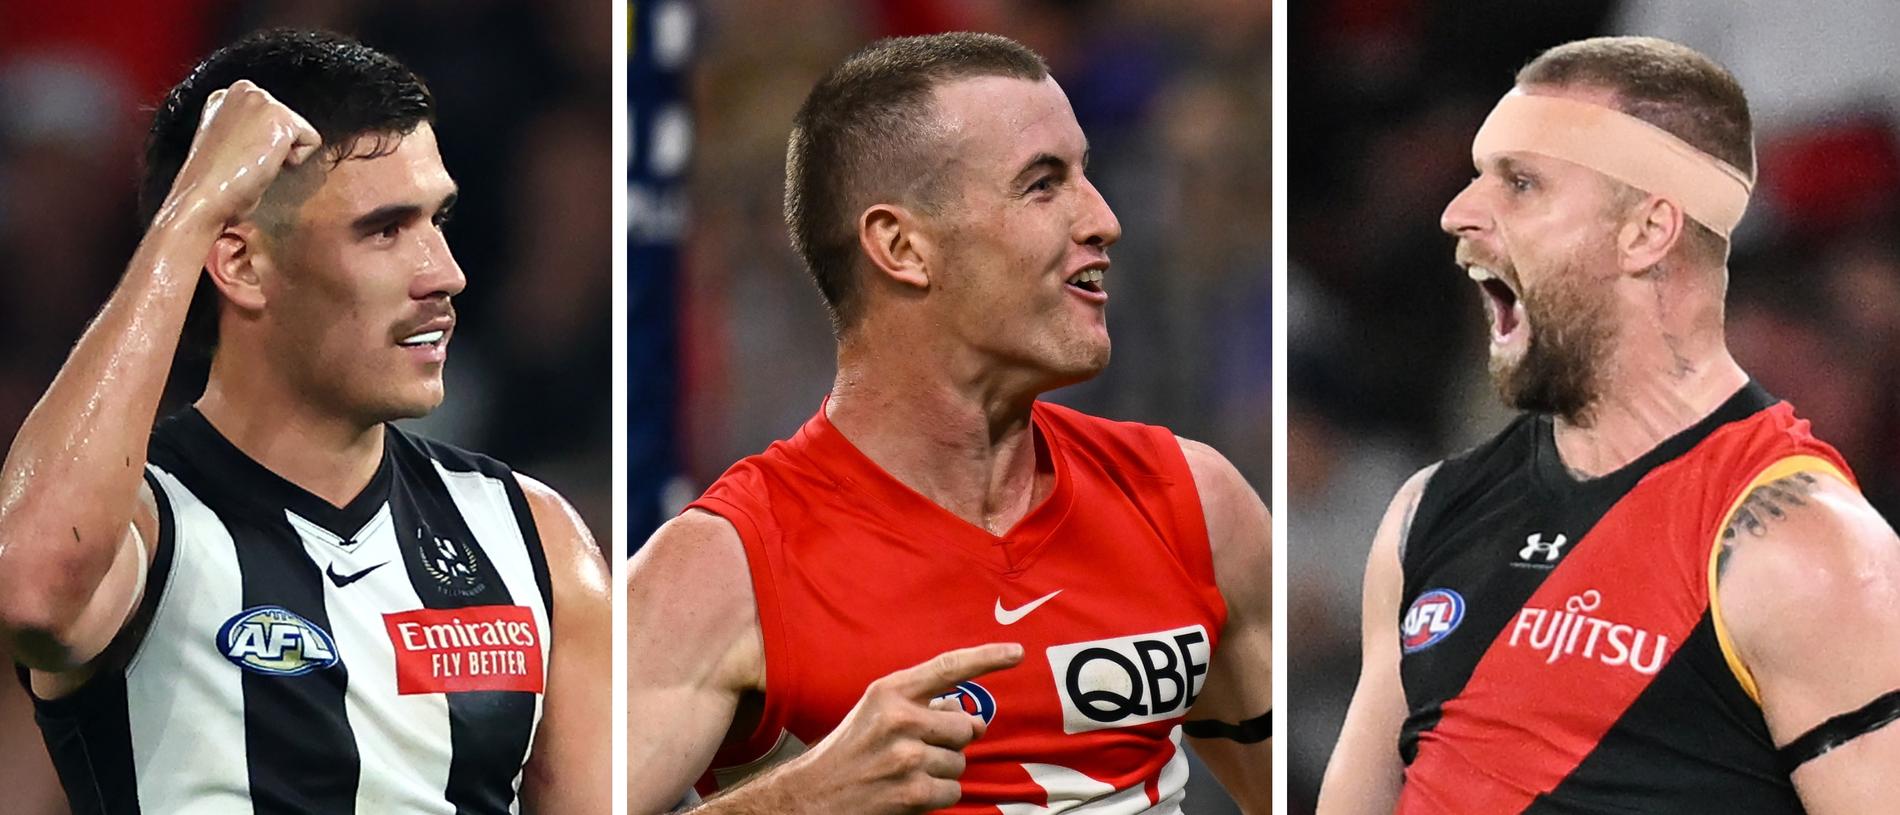 See the AFL Power Rankings after Round 9.